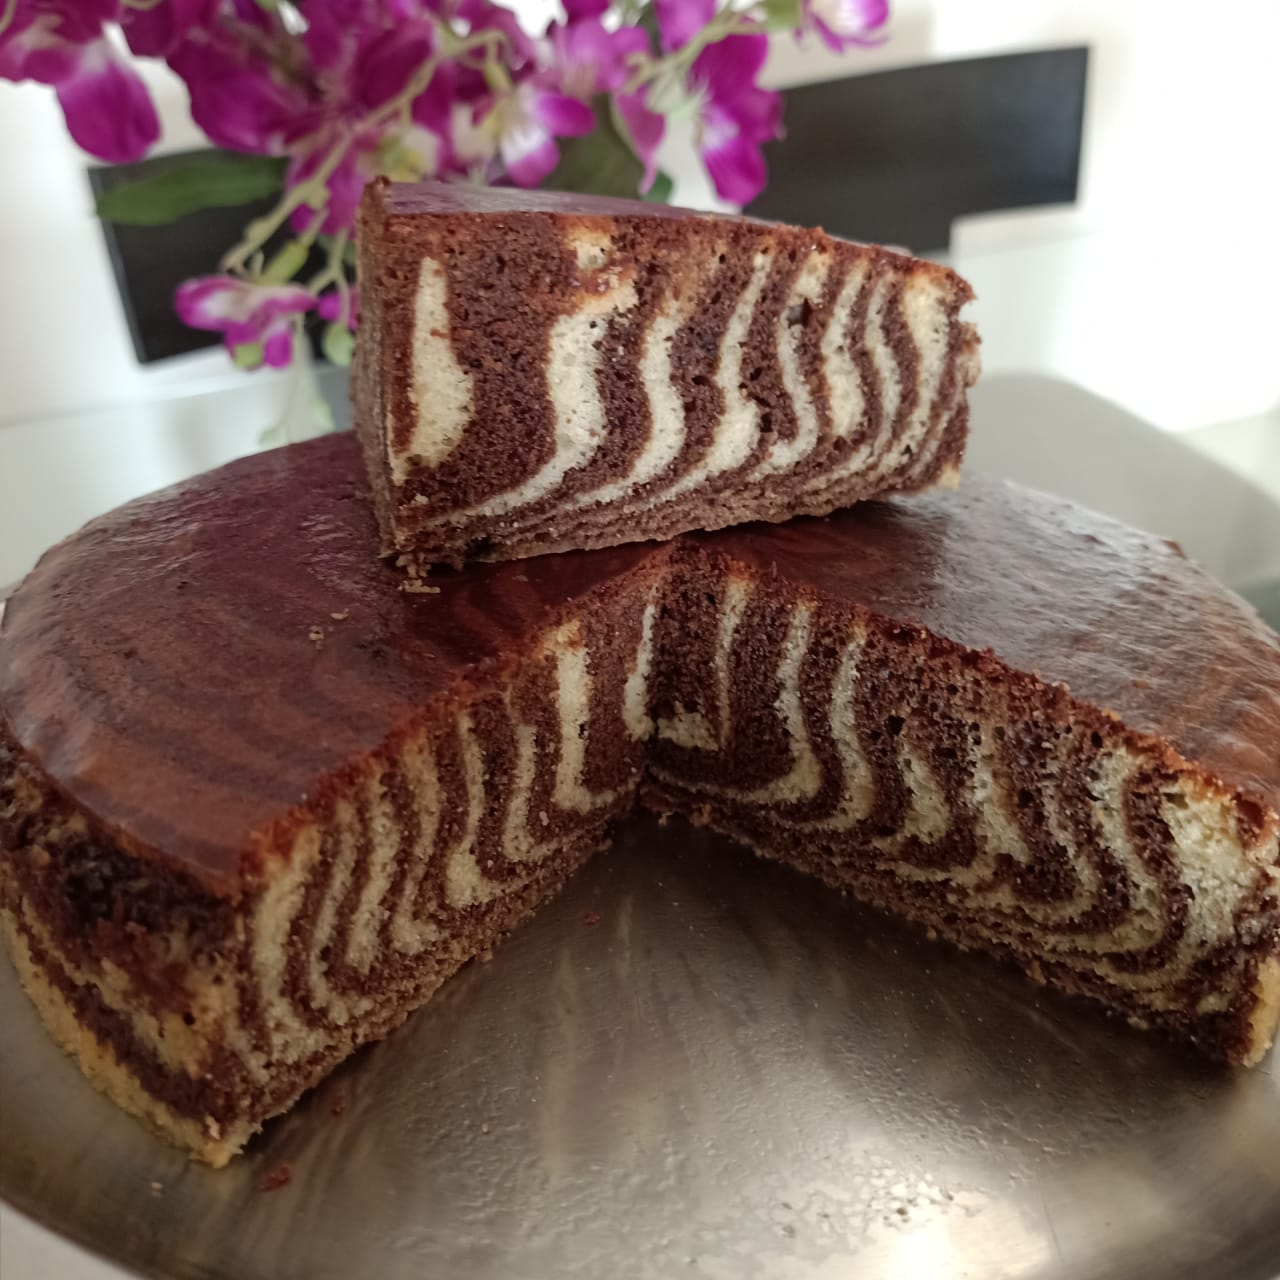 Cosentino's Markets - Have you tried our Zebra torte? The Zebra Torte with  Kahlua® Syrup is beautiful, festive and delicious, featuring dazzling  vertical stripes of chocolate and white cakes, covered whipped topping,